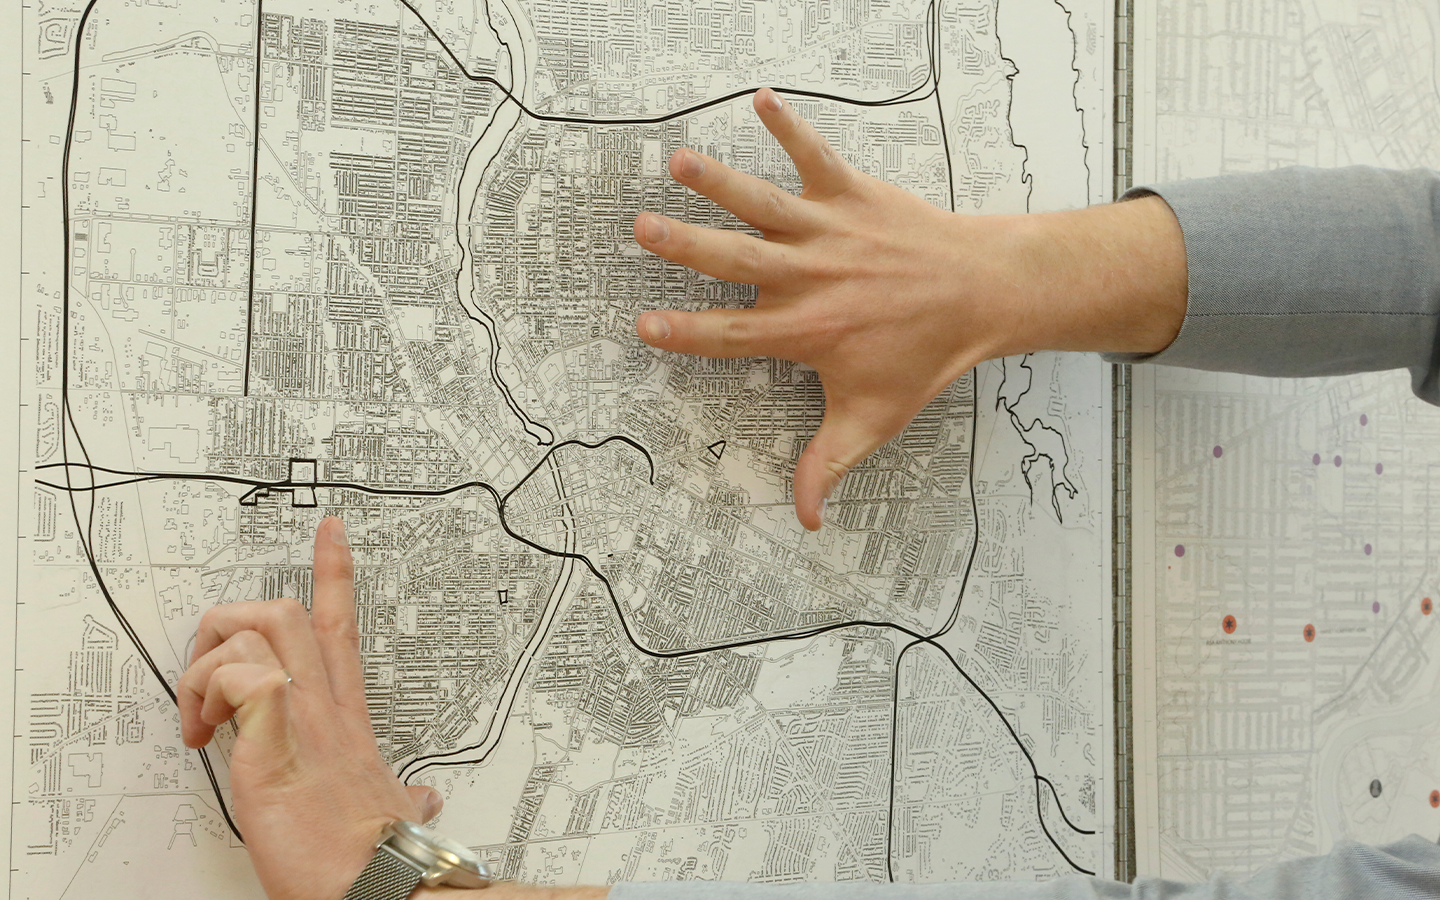 A person with hands on top of a map on the wall.